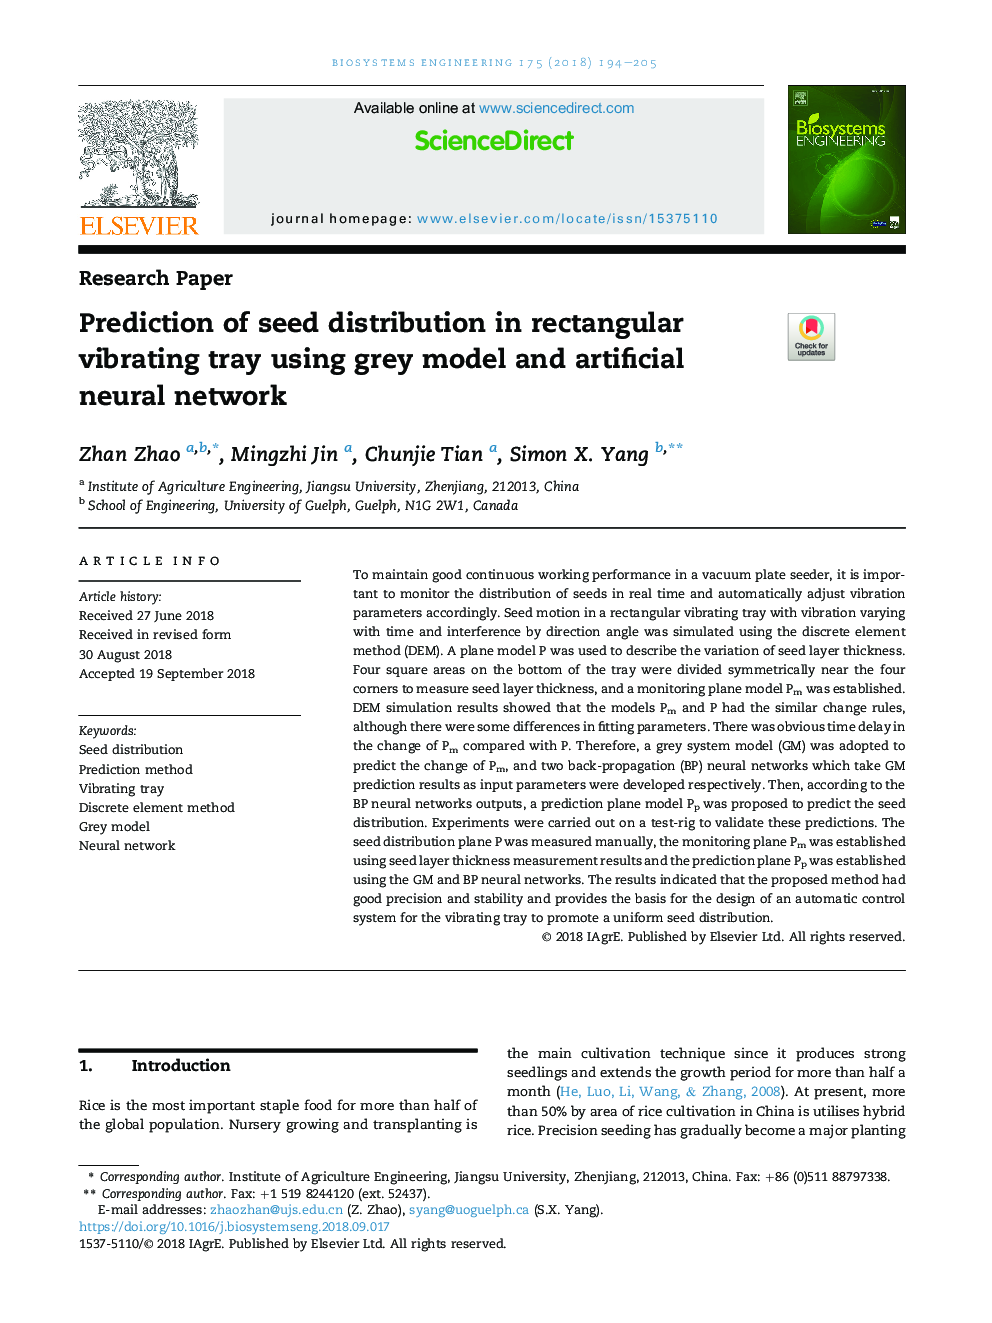 Prediction of seed distribution in rectangular vibrating tray using grey model and artificial neuralÂ network